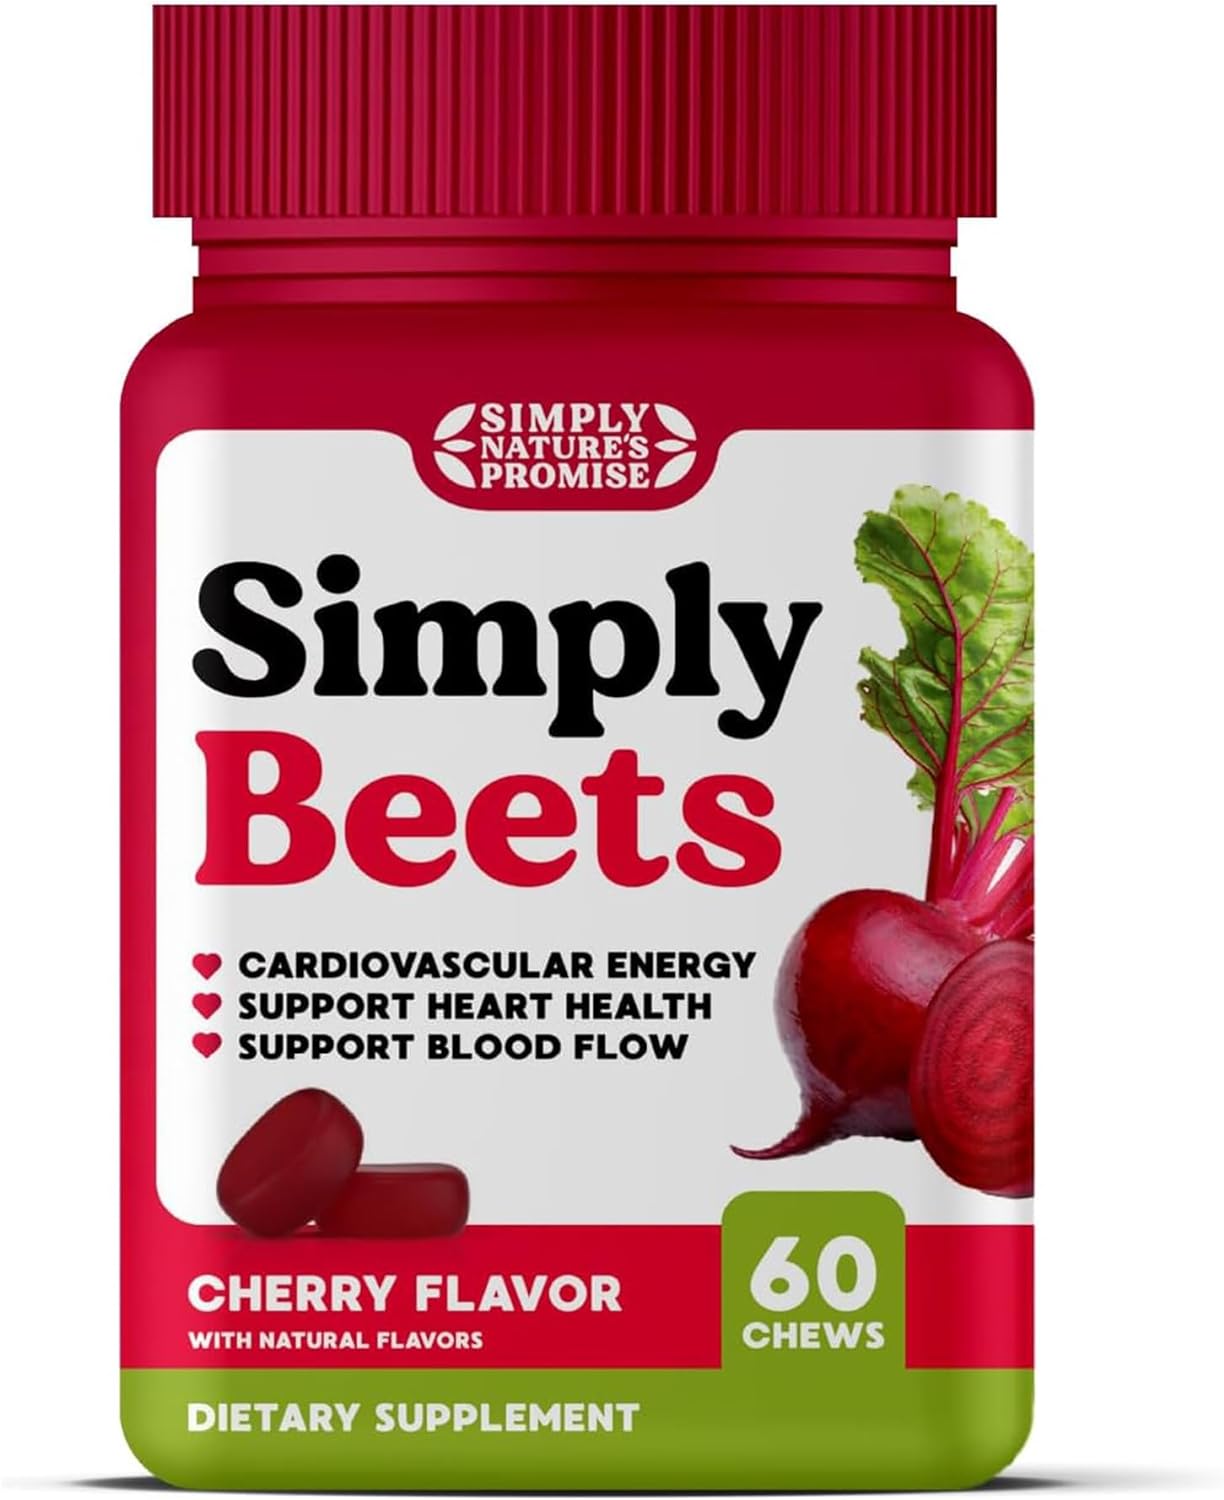 Simply Nature's Promise - Simply Beets Heart Gummies - Delicious Cherry Flavor - Non-GMO Beet Gummy Chews for Help with Daily Heart Health, Blood Pressure, and Circulation Support - 60 Gummies - image 1 of 4